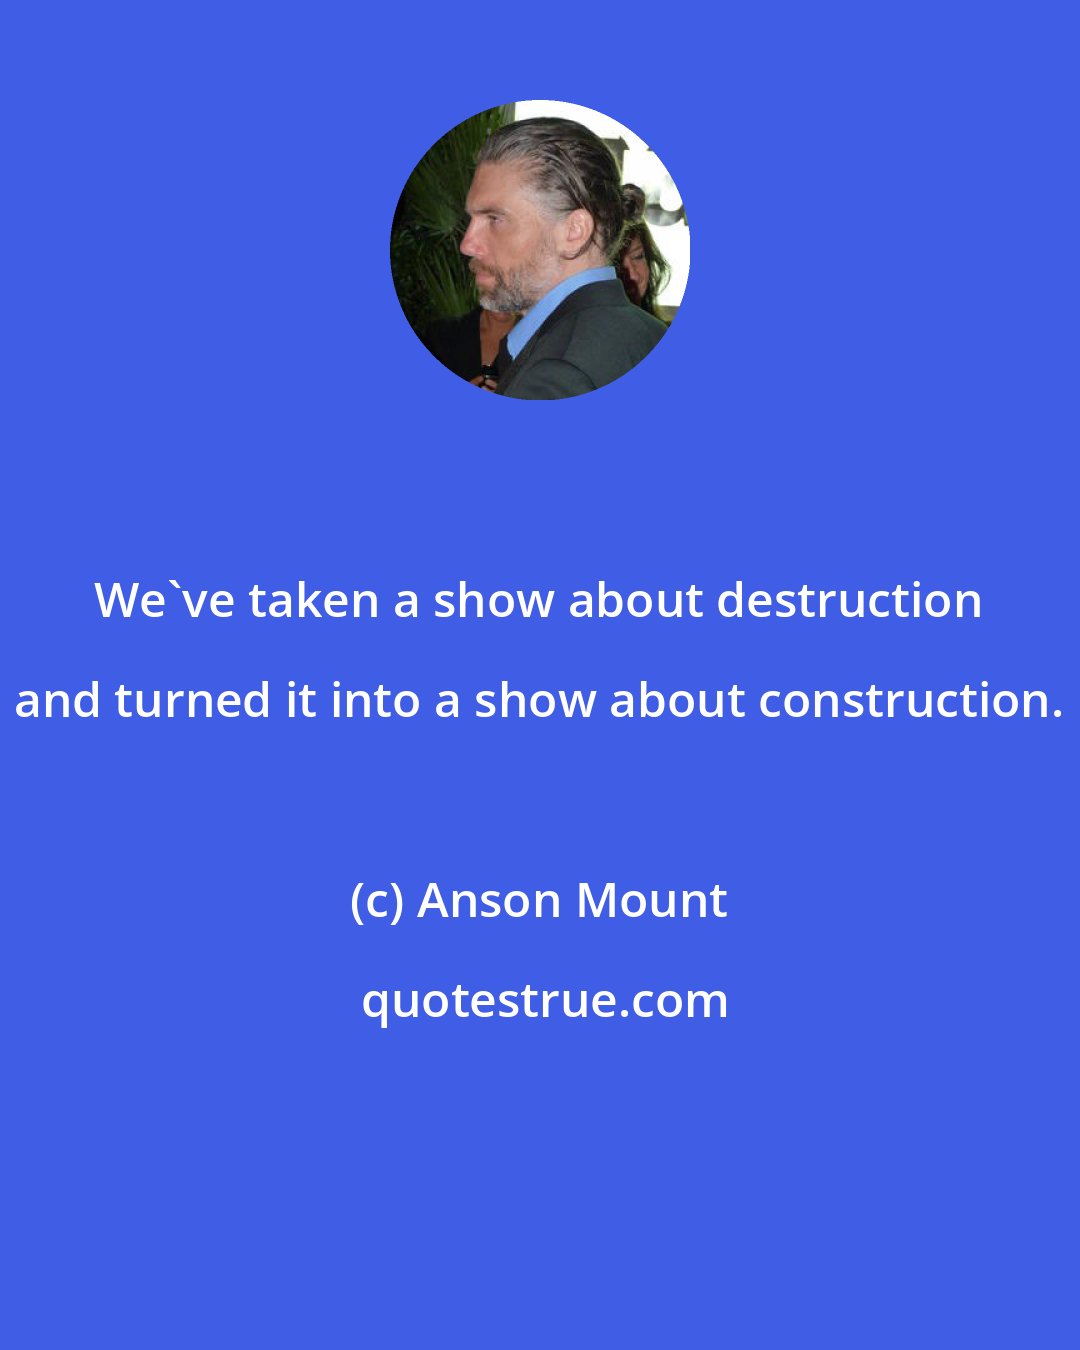 Anson Mount: We've taken a show about destruction and turned it into a show about construction.